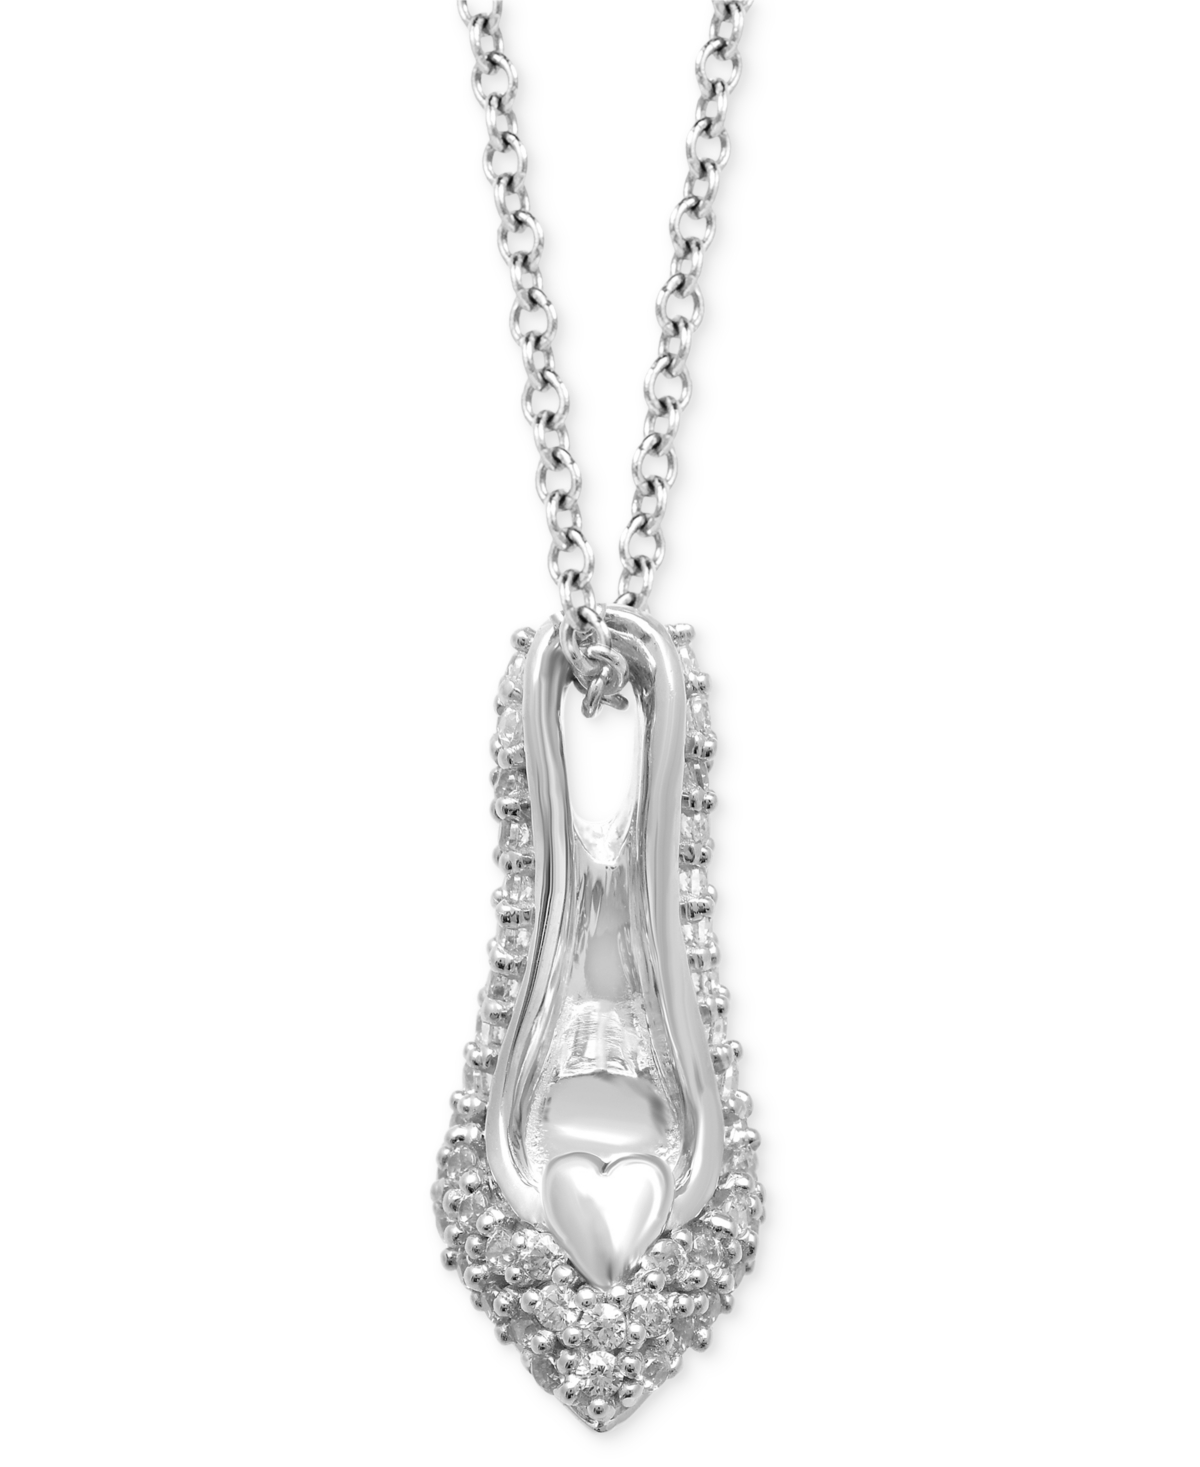 Diamond Cinderella Slipper Pendant Necklace (1/5 ct. t.w.) in Sterling Silver, 16" + 2" extender - Sterling Silver